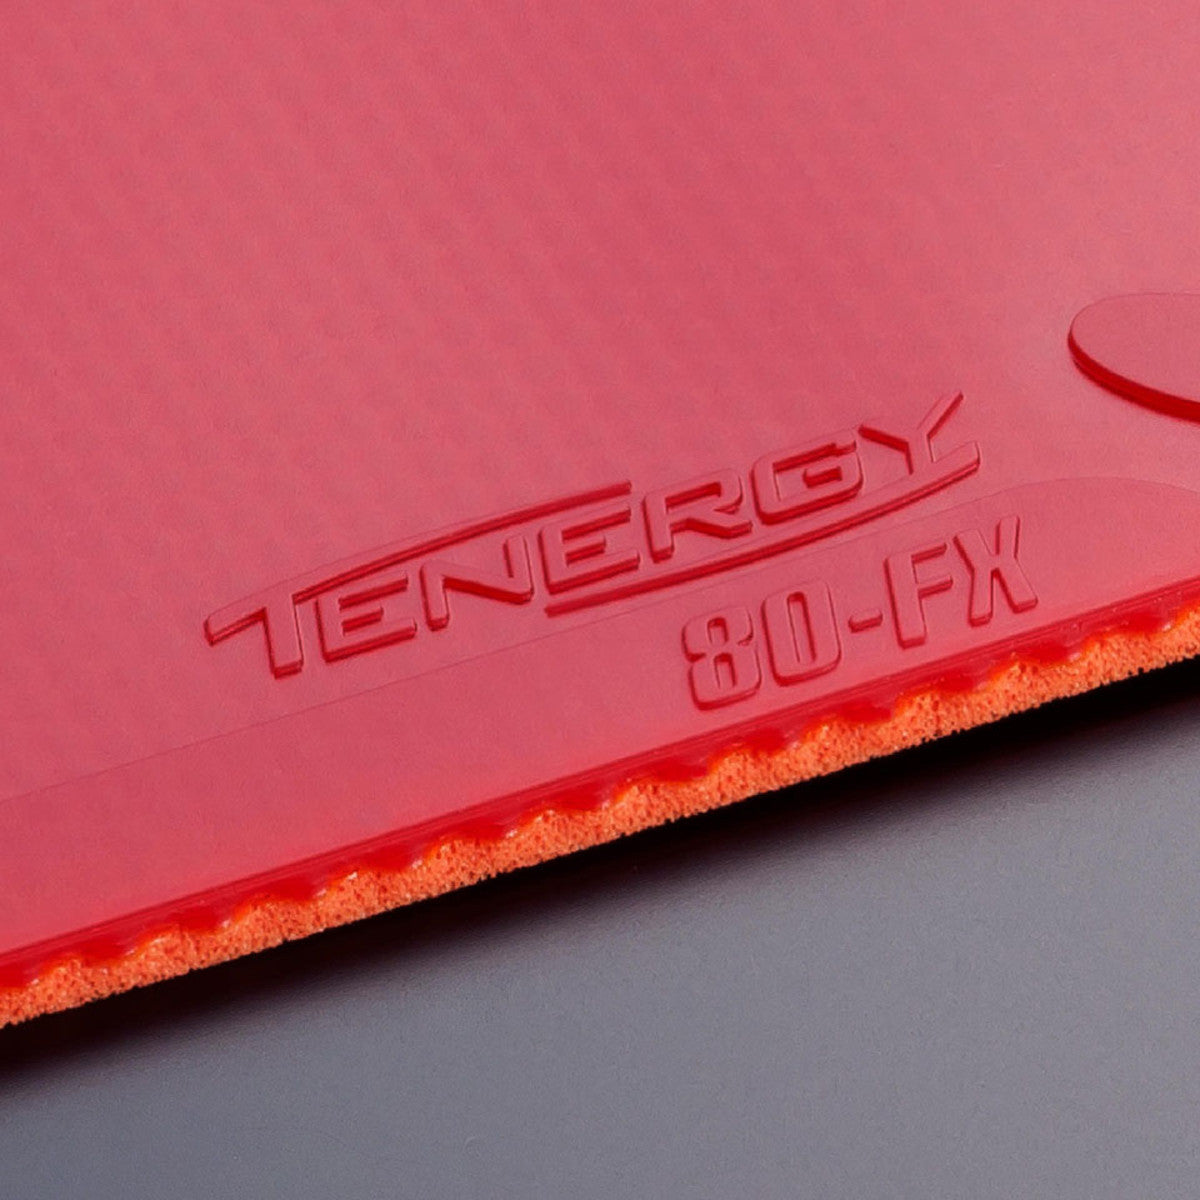 Butterfly Tenergy 80 FX - Table Tennis Rubber in Black and Red